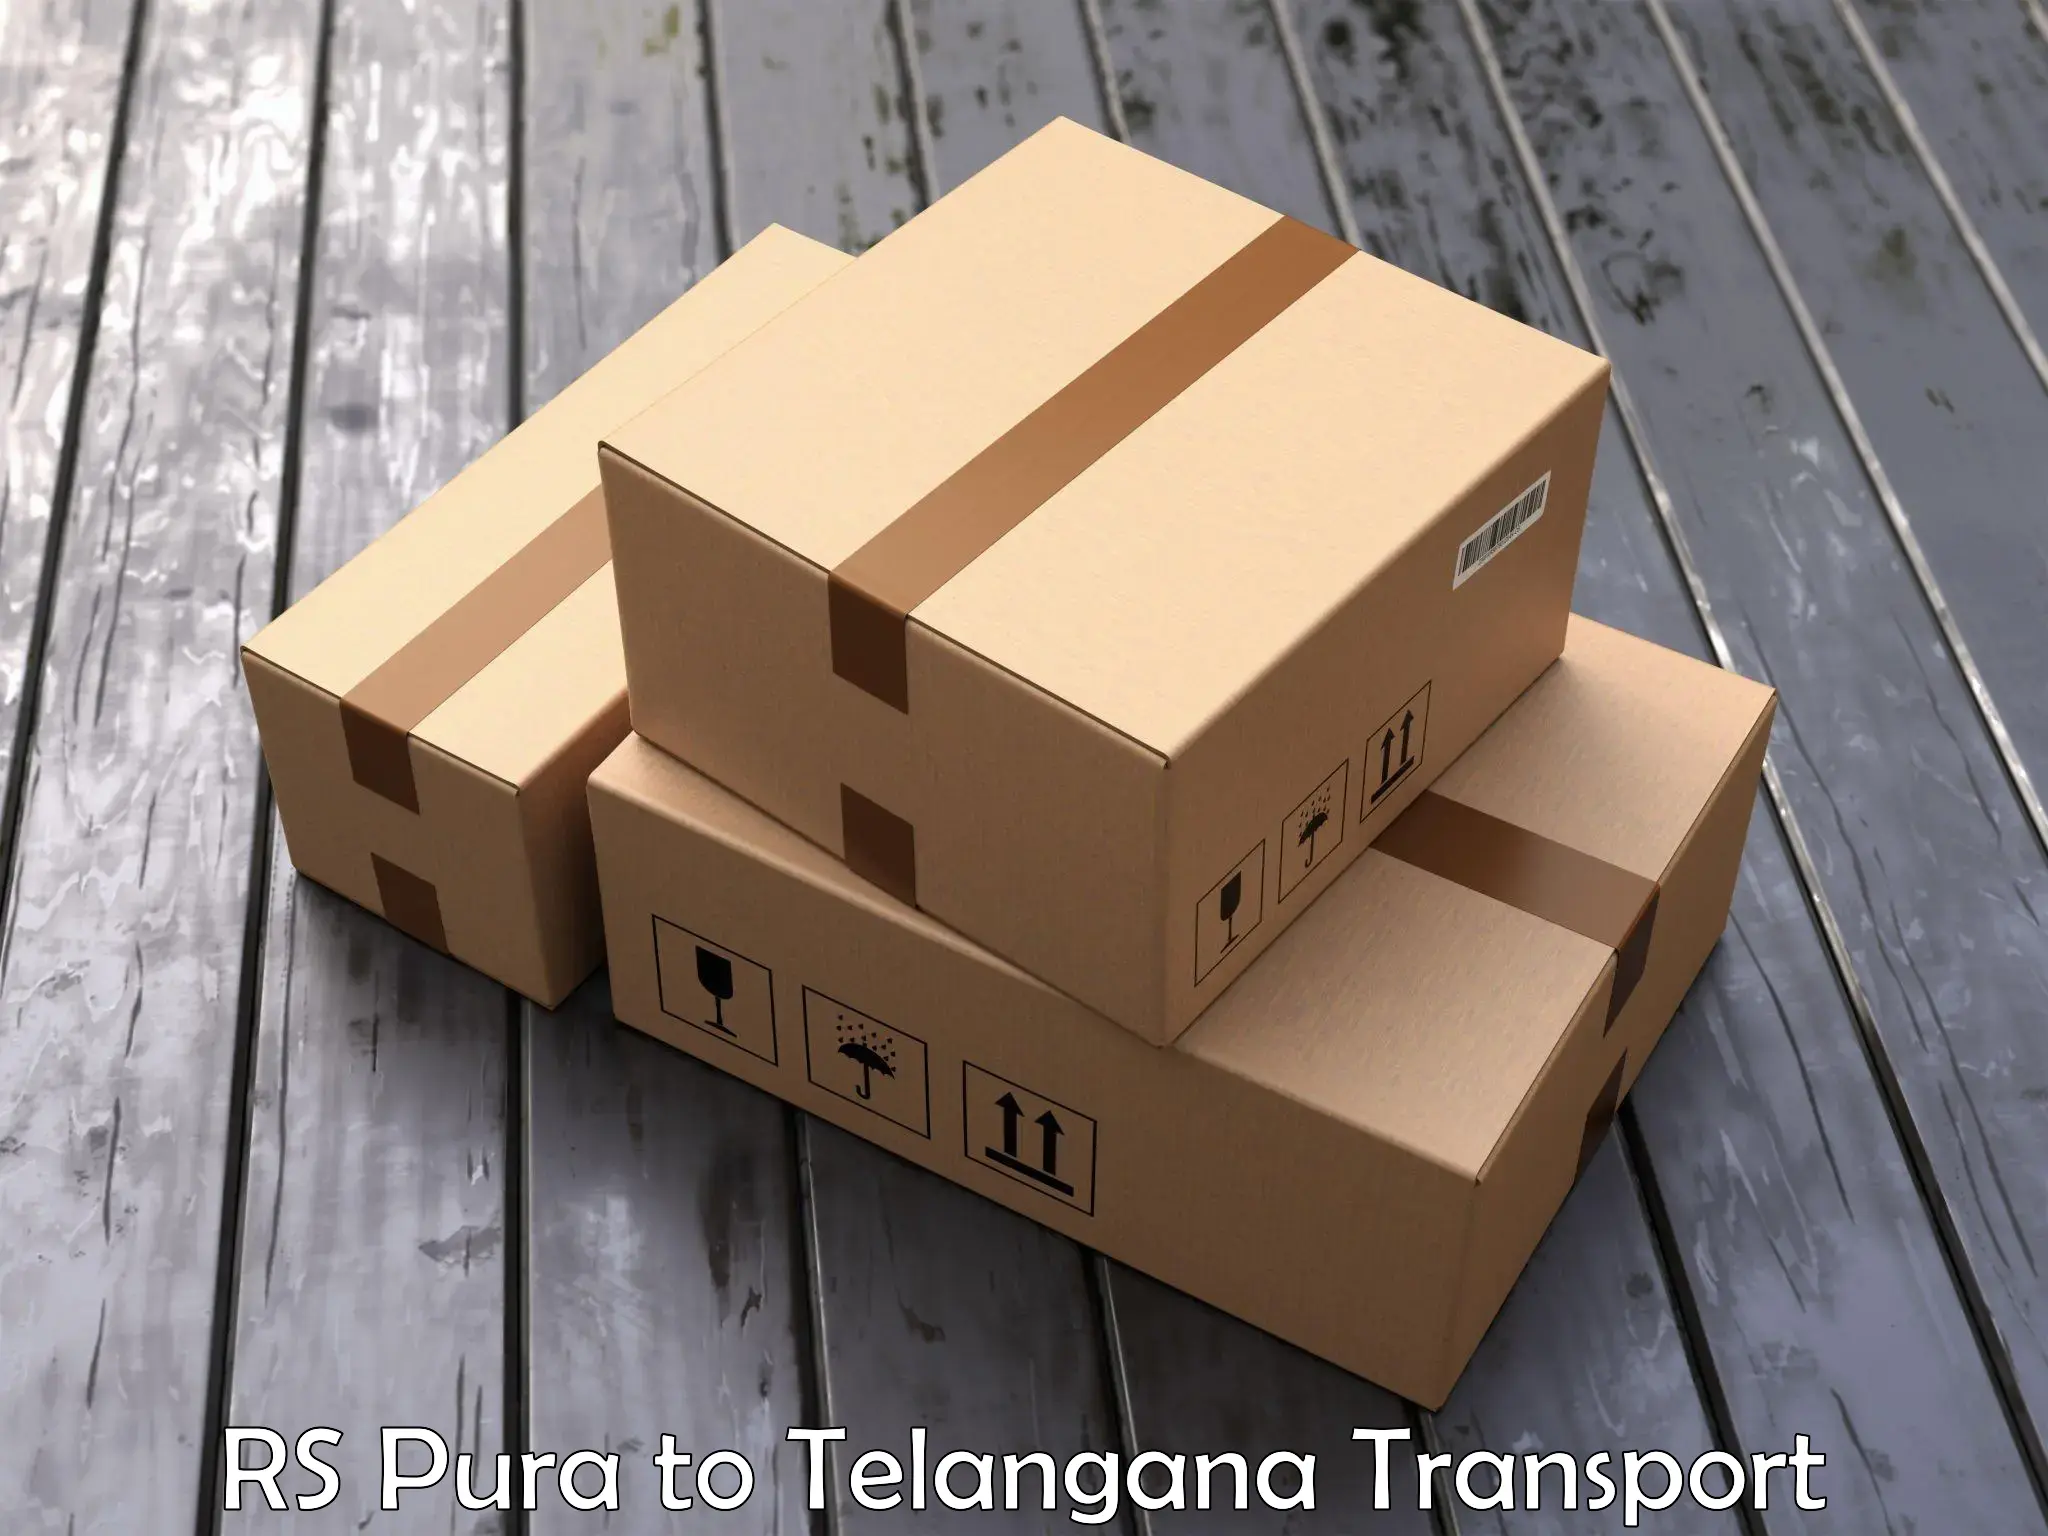 Two wheeler parcel service RS Pura to Hyderabad